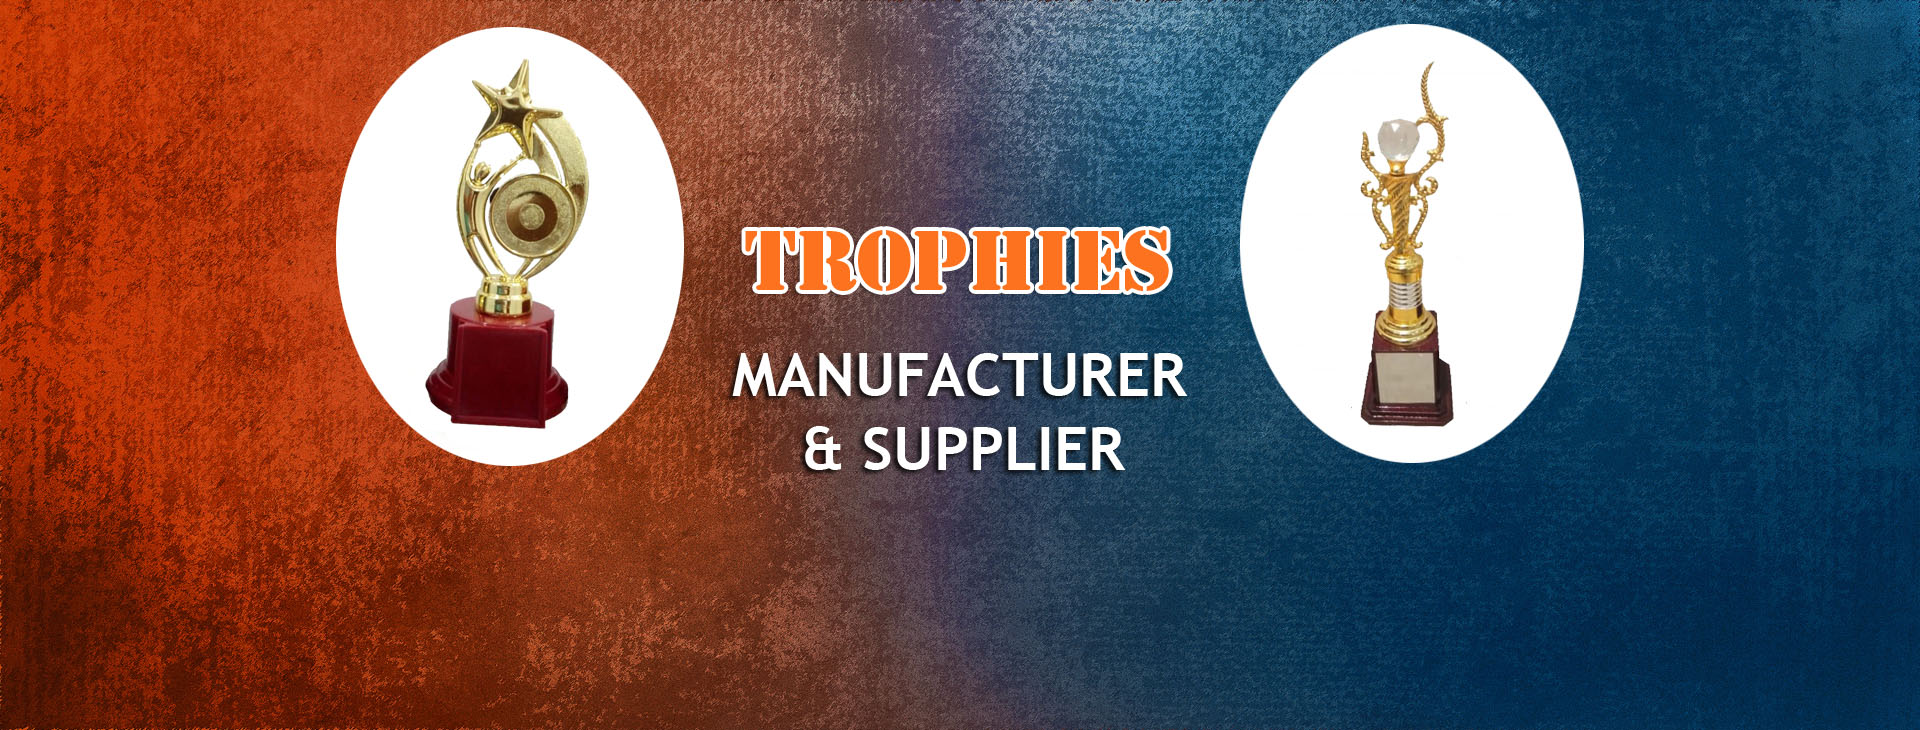 Manufacturers of Trophies 